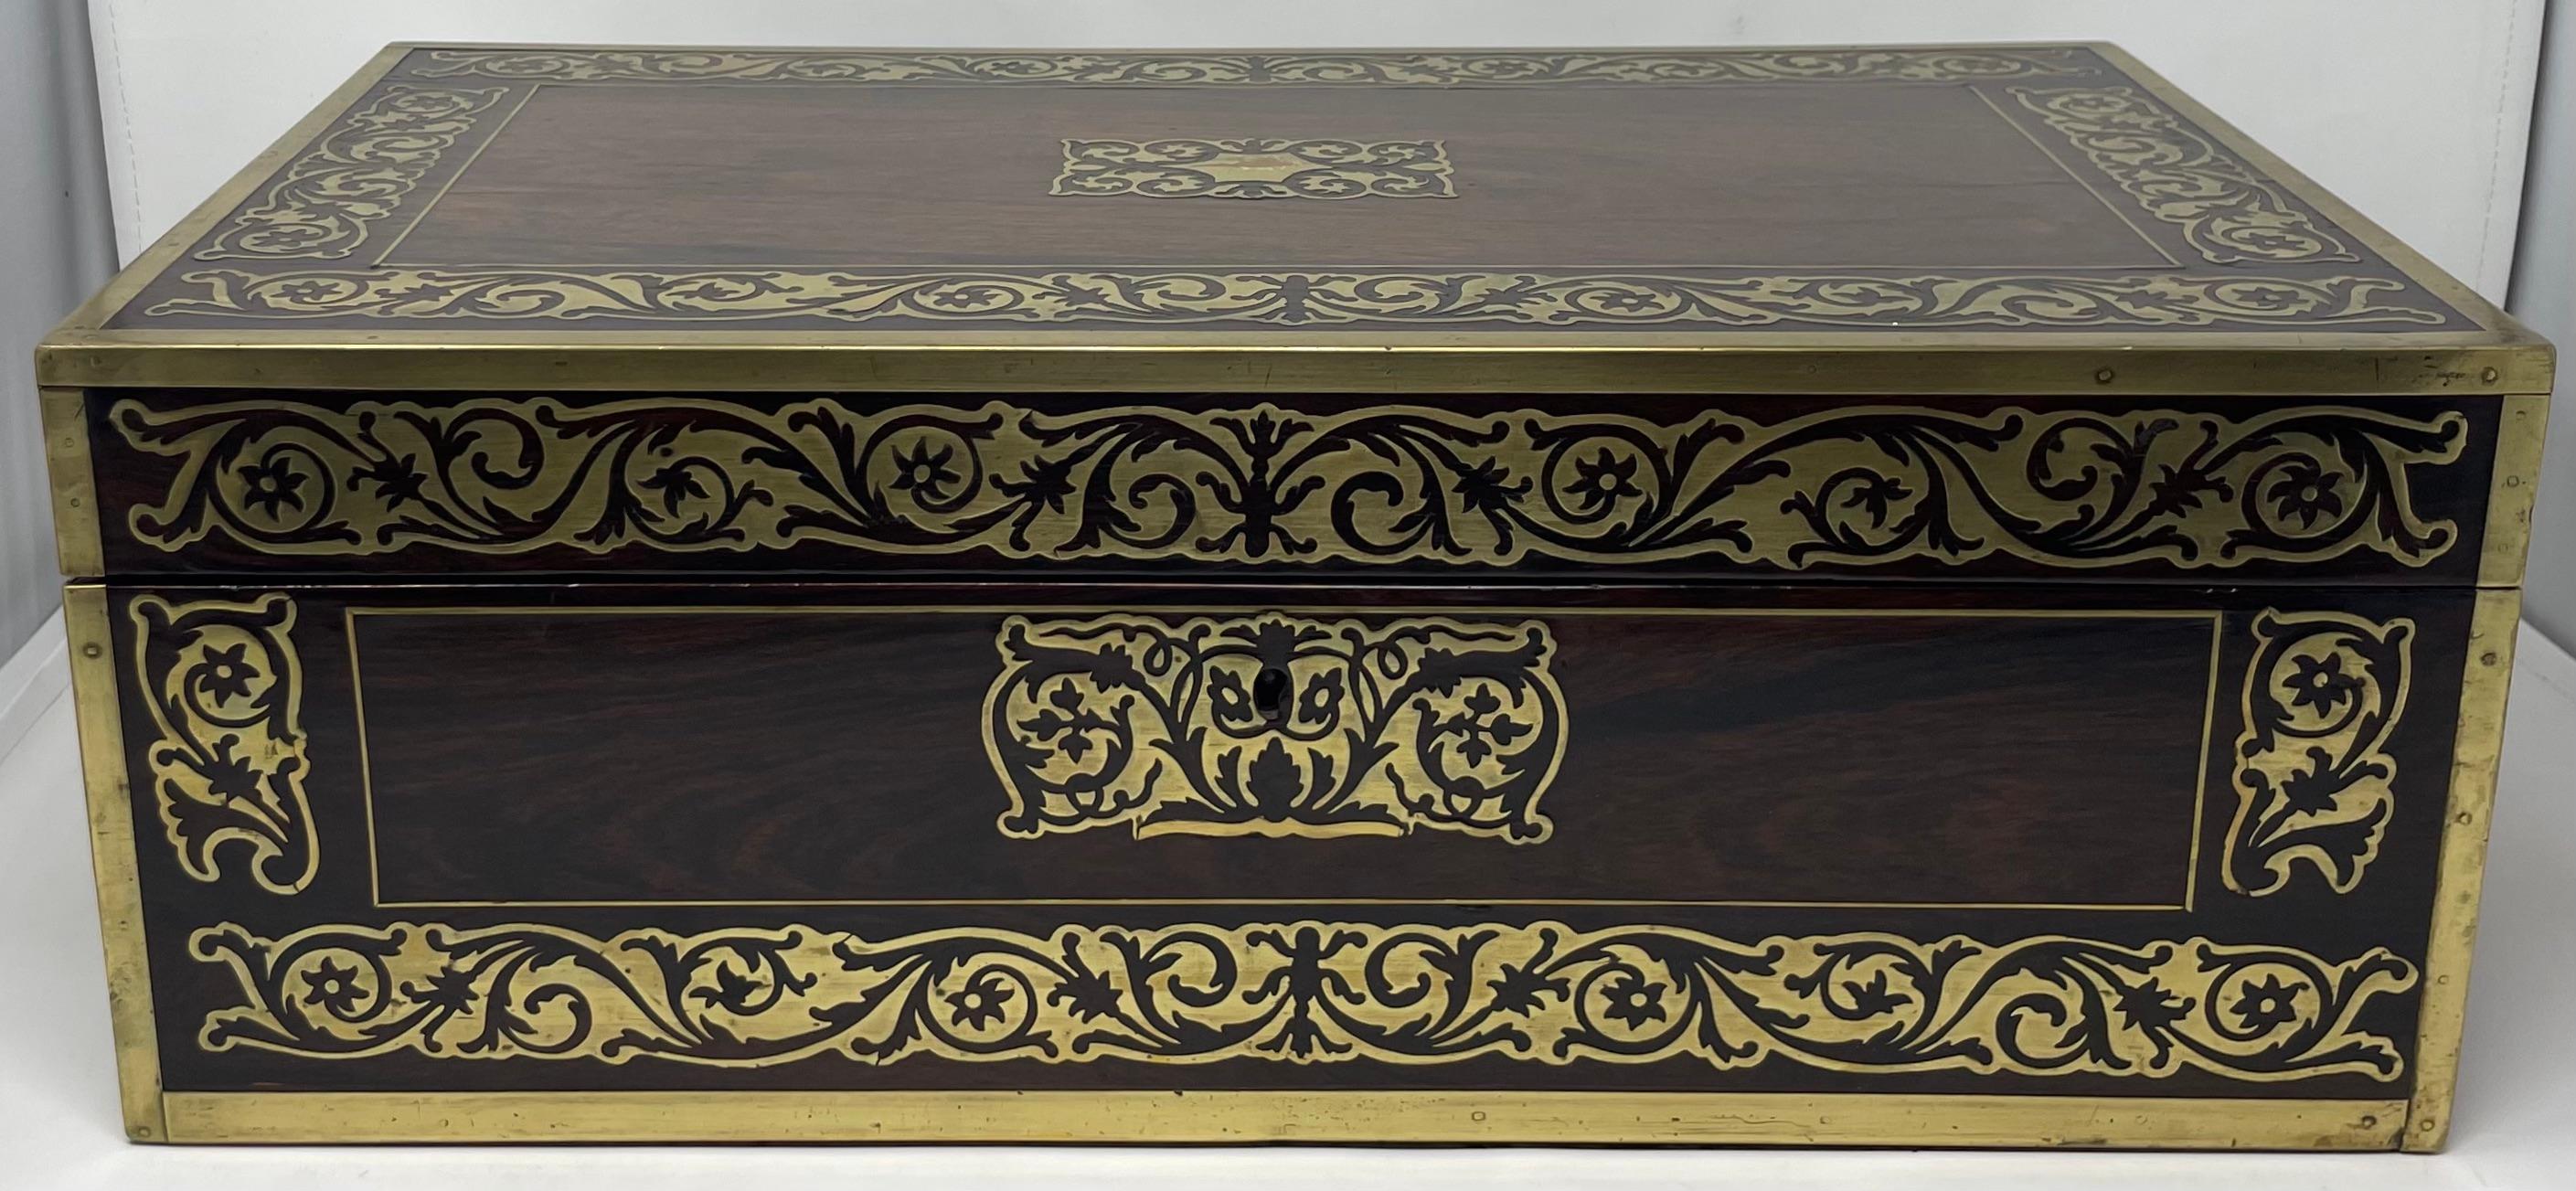 19th Century Antique English Regency Rosewood Travelling Lap Desk Box, Circa 1830 For Sale